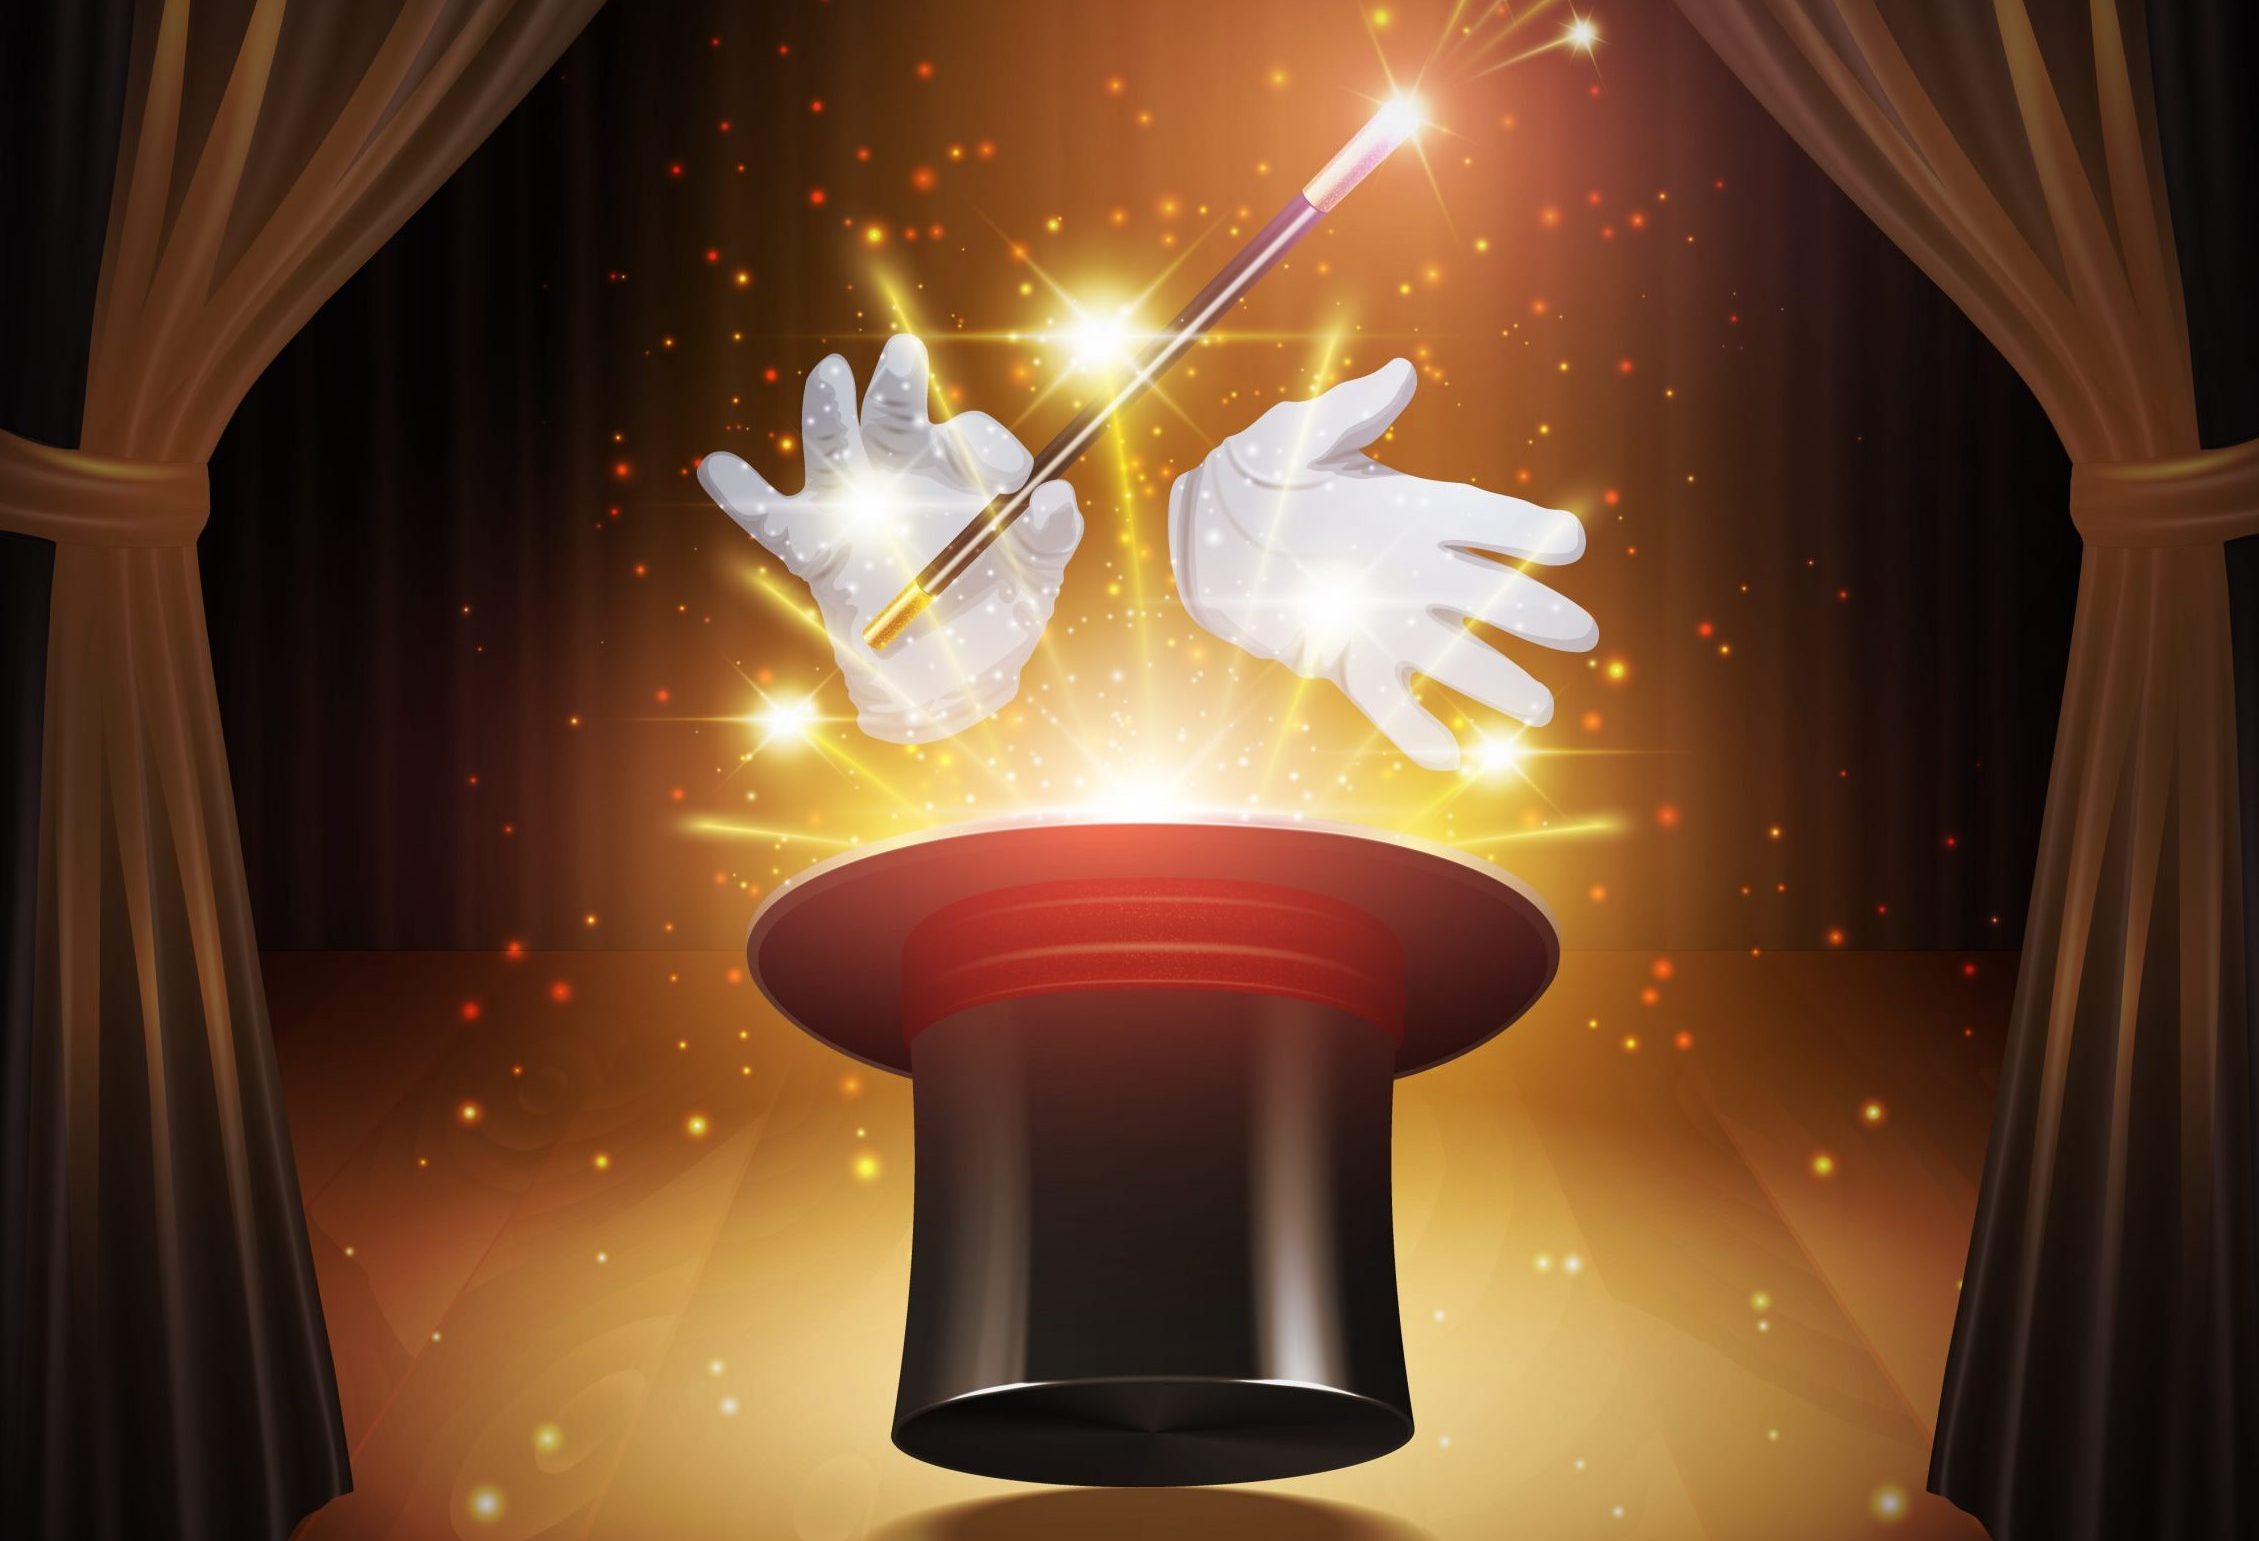 Magic trick poster with realistic magician cylinder gloves and stick with curtains on background vector illustration